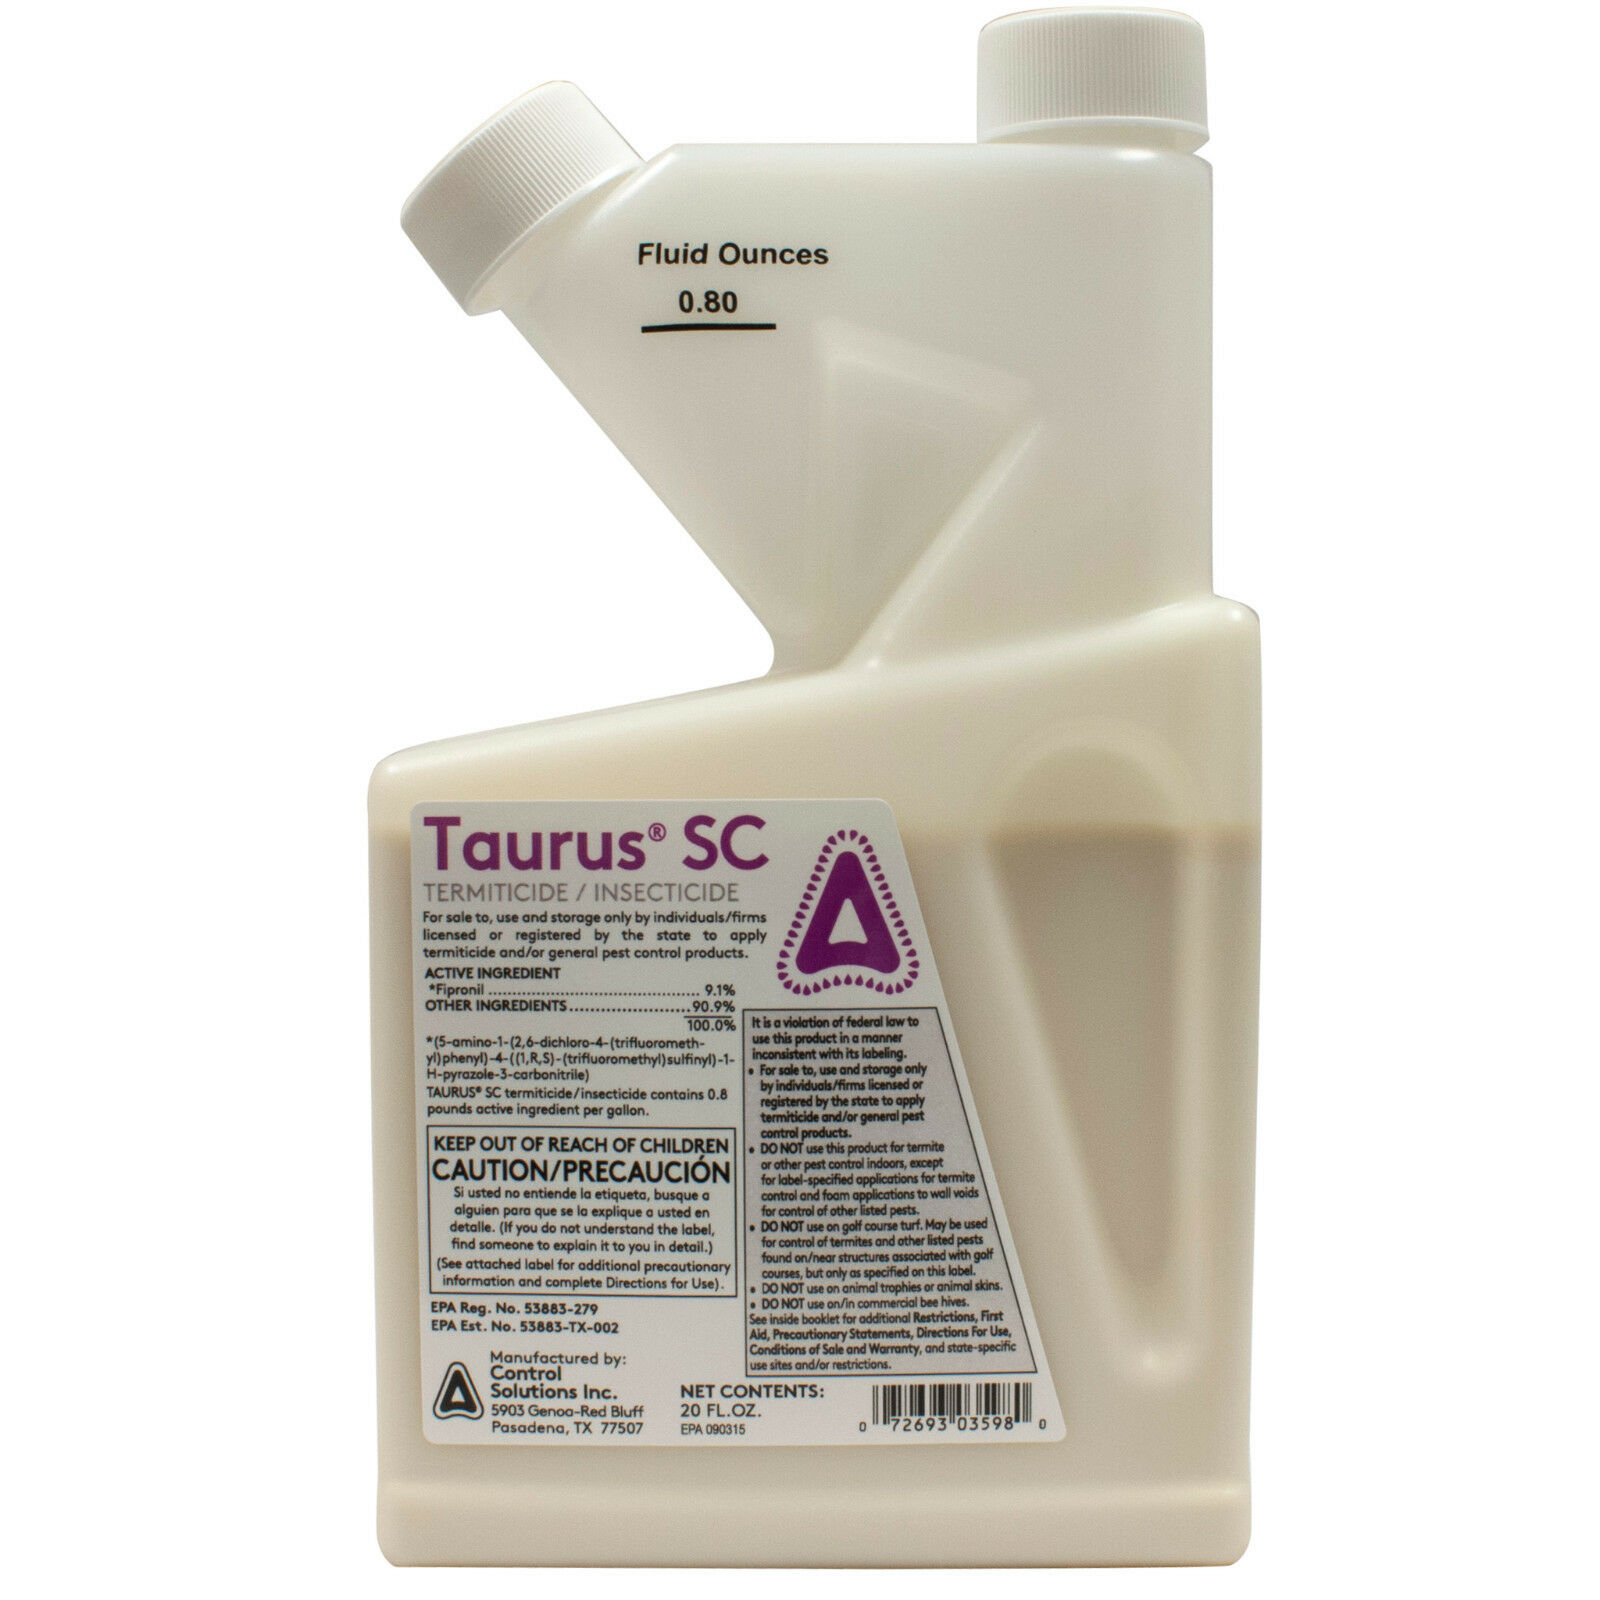 Taurus Sc Termite Spray Ant Spray - Generic Termidor - Not For Sale To: Ny,ct,in